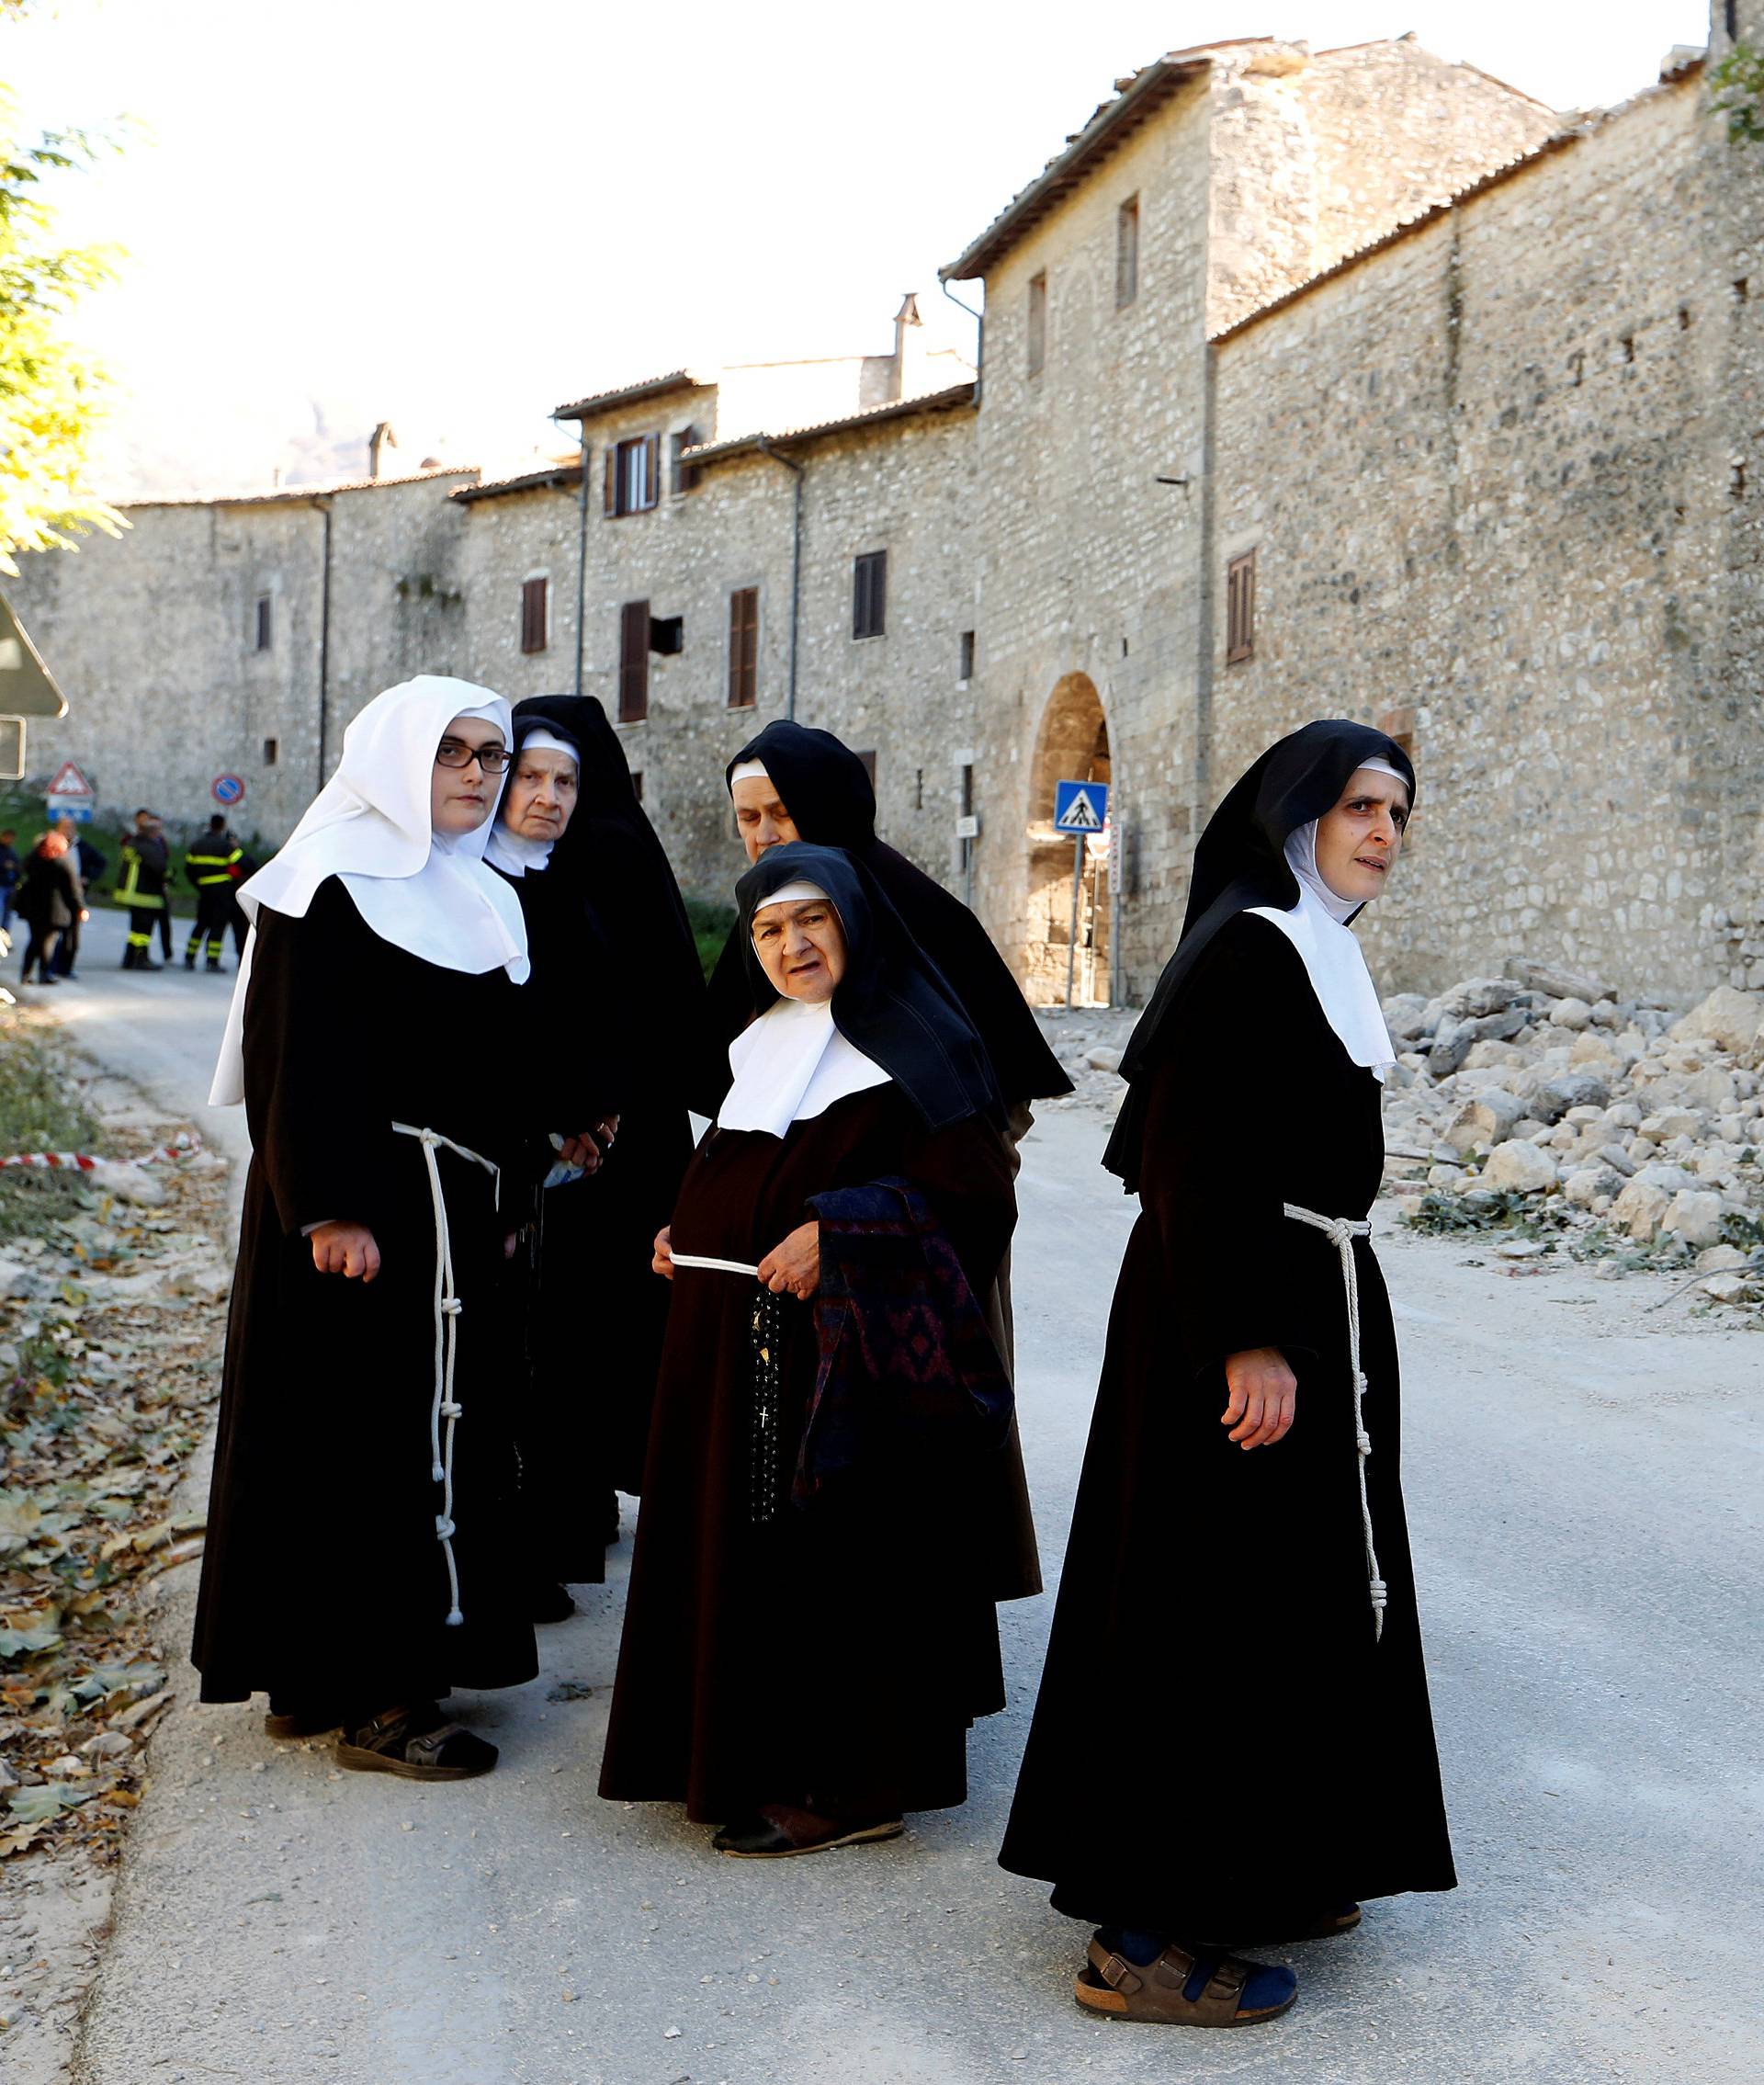 Nuns stand next a partially collapsed wall following an earthquake in Norcia